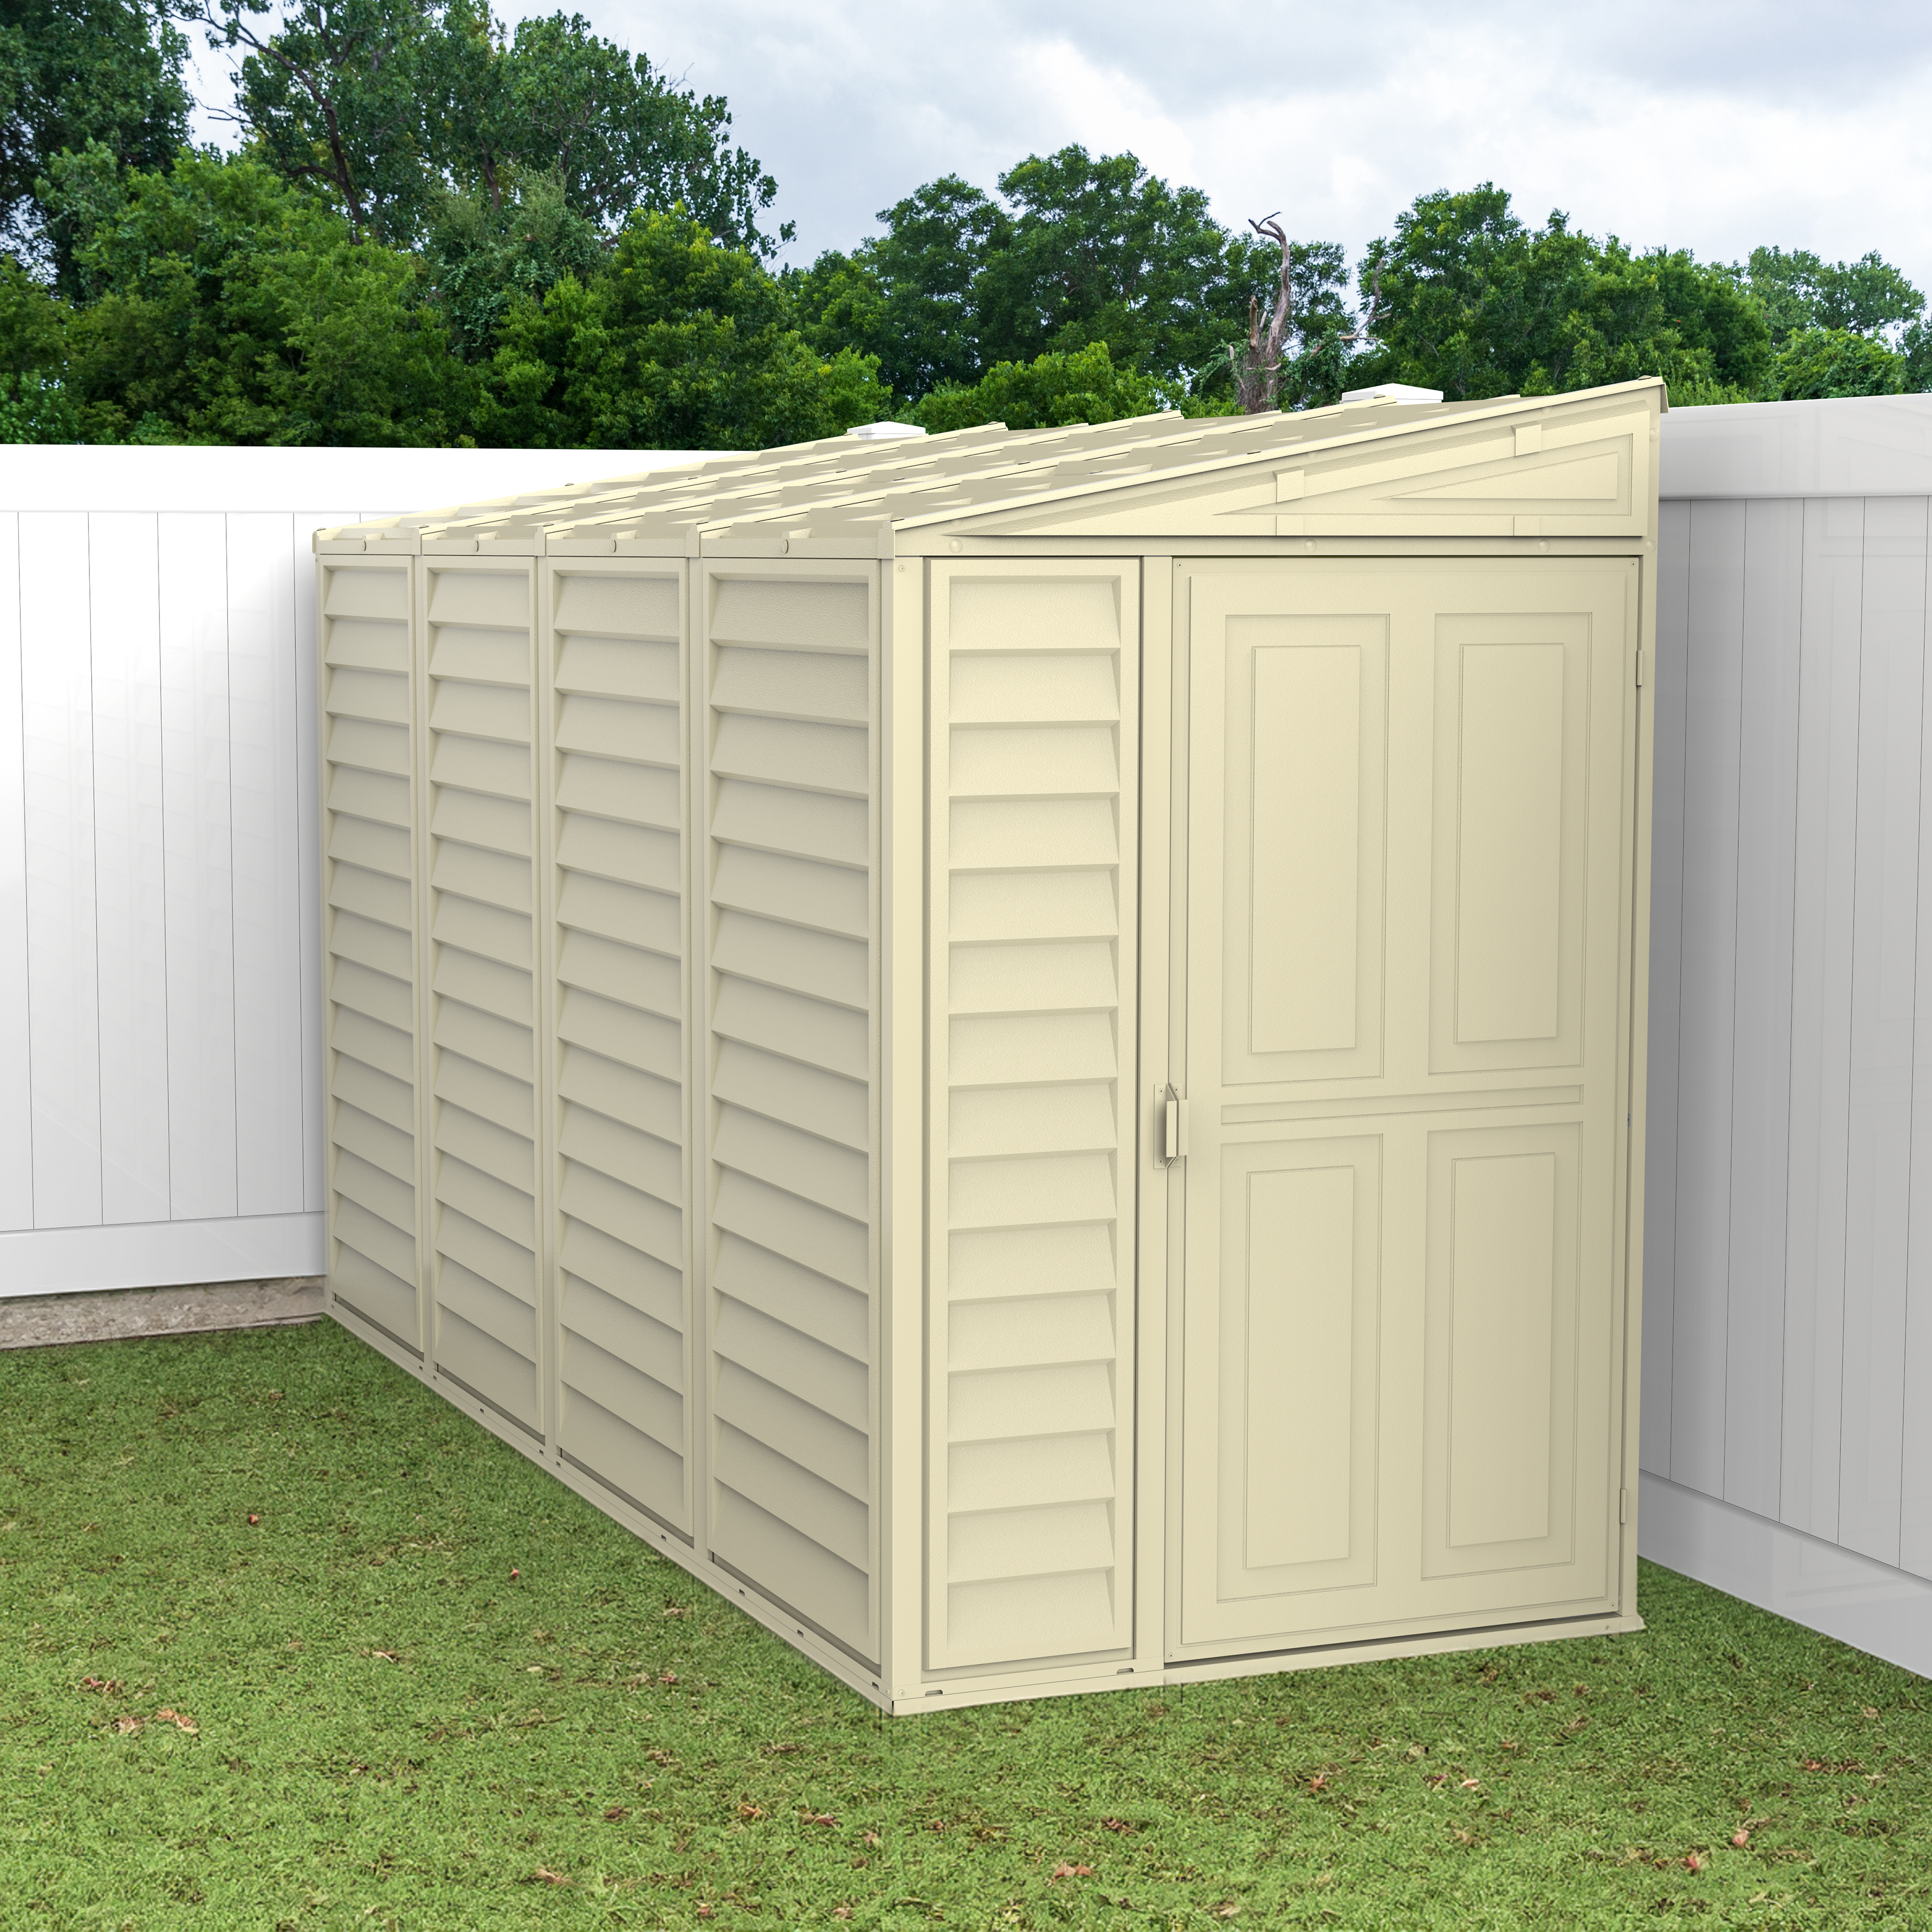 Duramax 4ft x 10ft Sidemate Vinyl Resin Outdoor Storage Shed With Foundation Kit